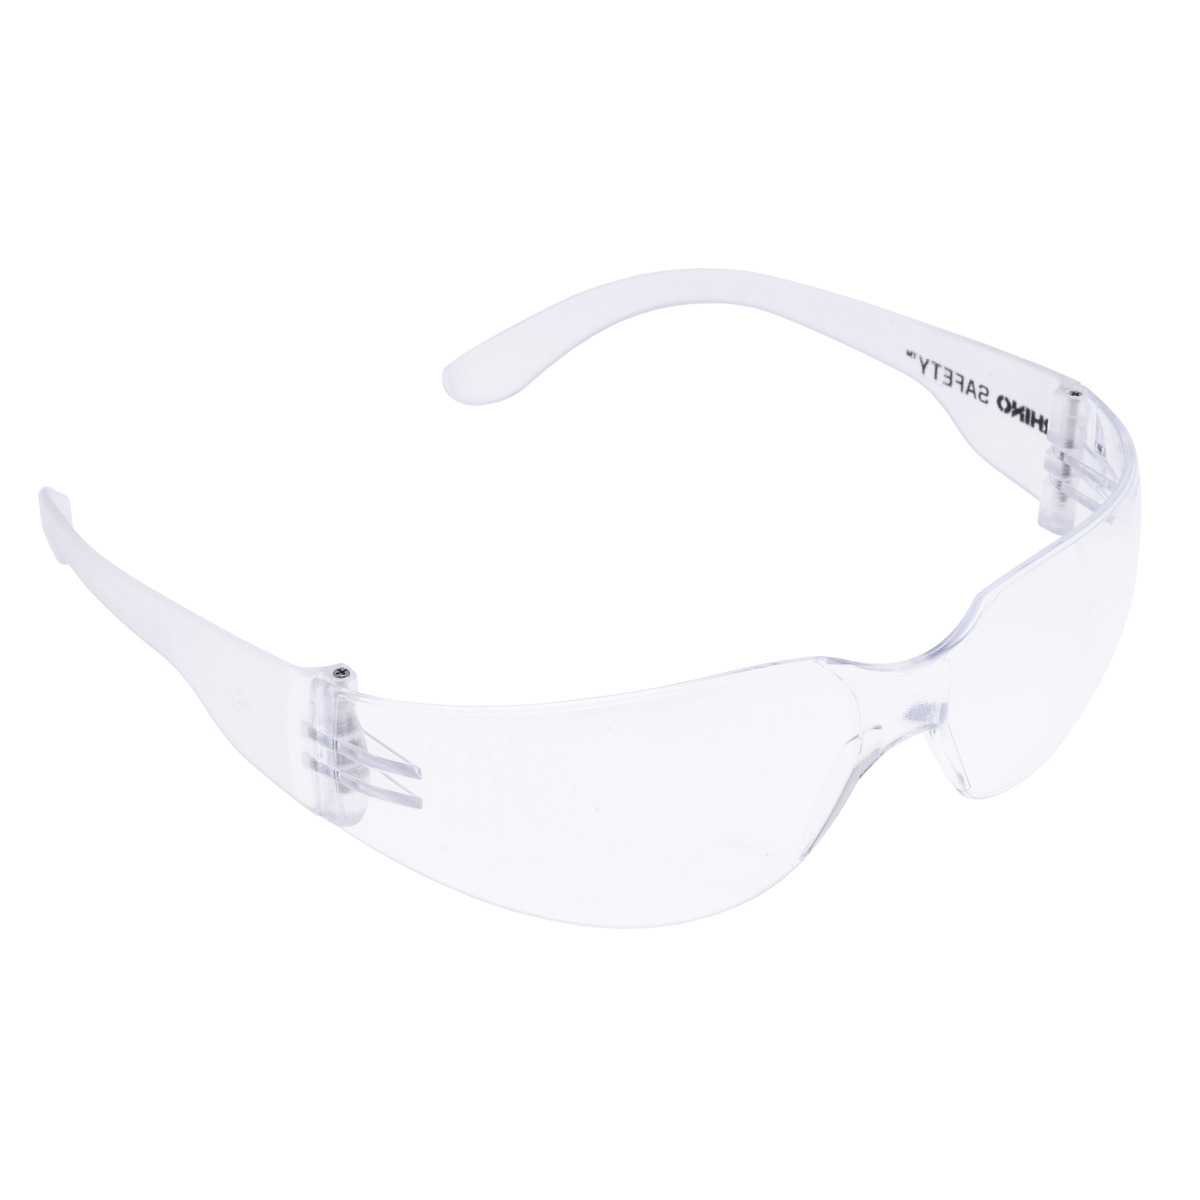 Impact-Resistant Polycarbonate Safety Glasses, Clear Wraparound